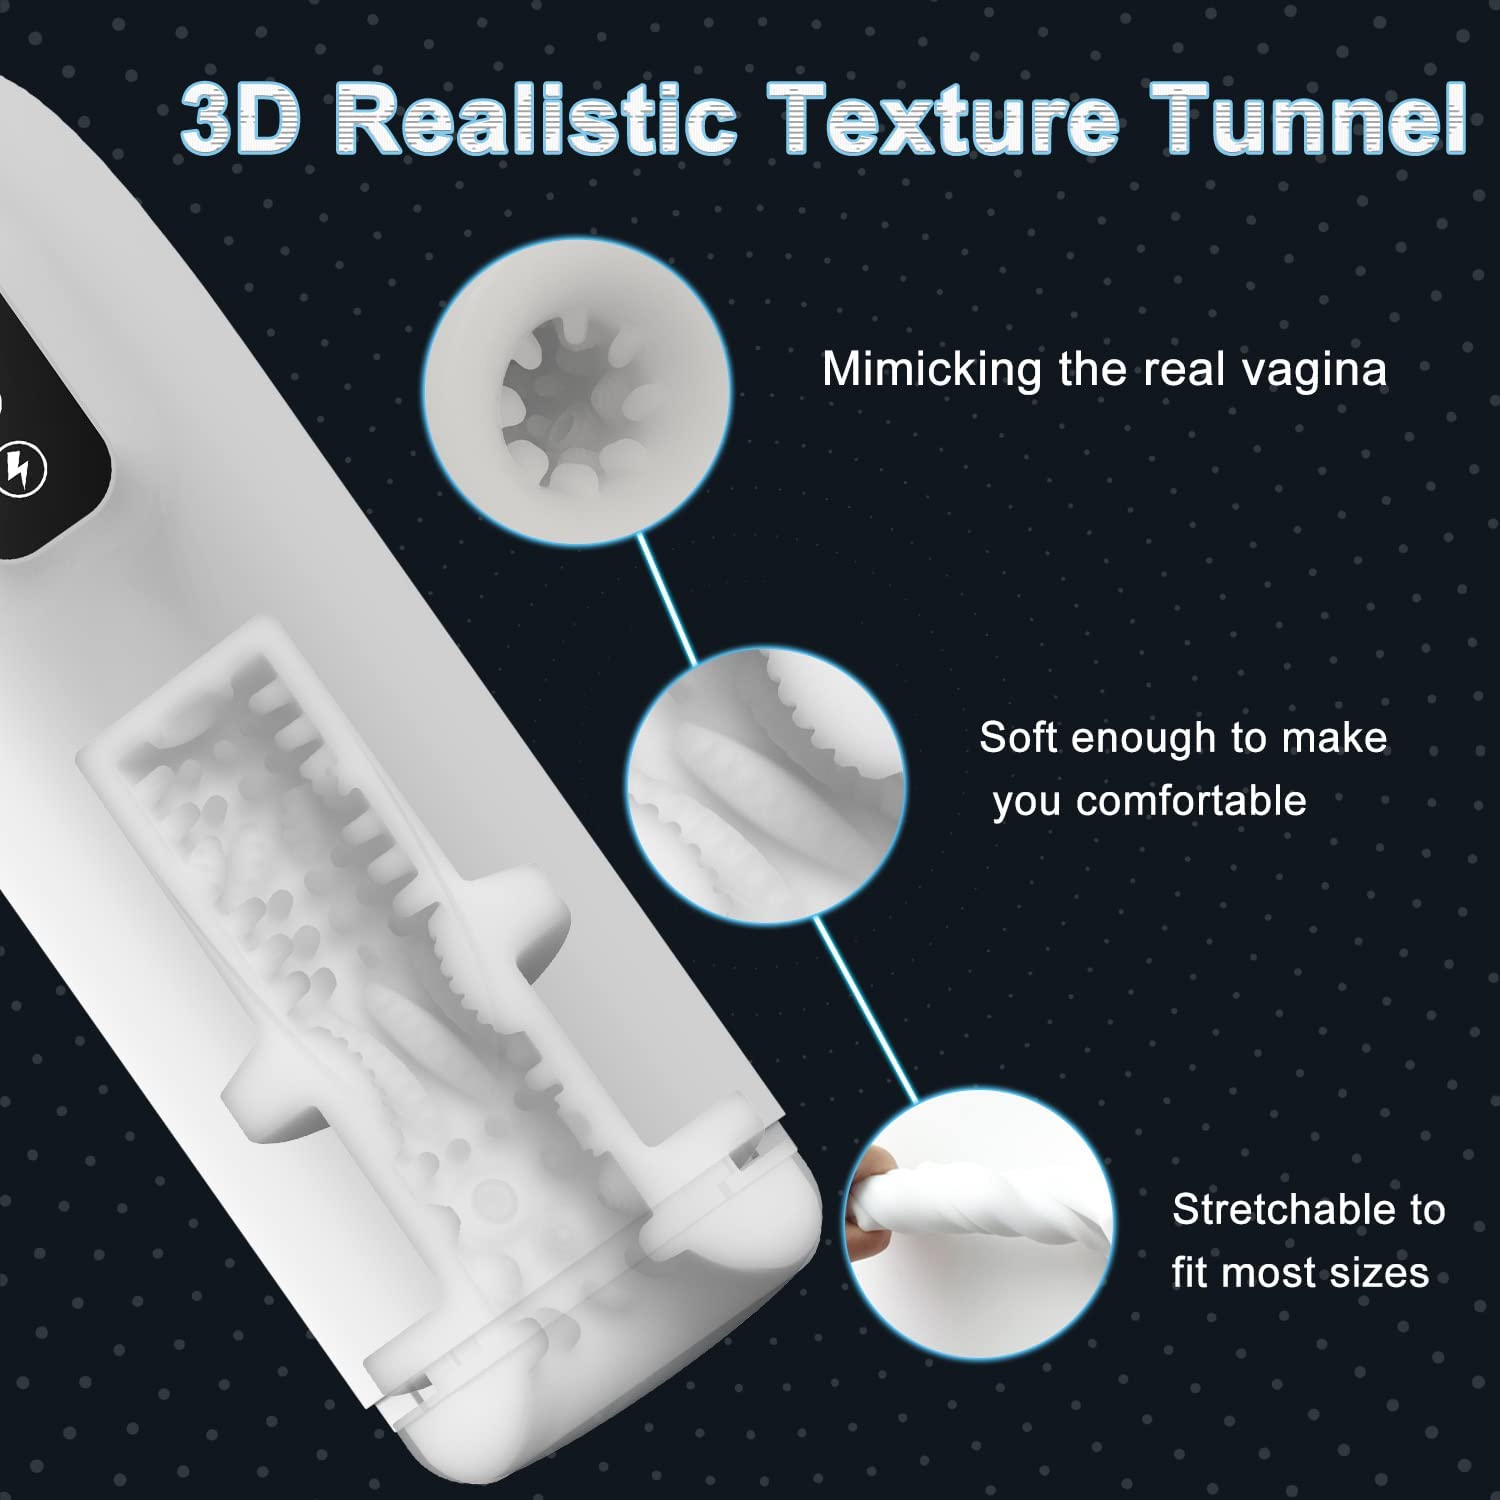 Automatic Male Masturbator with 7 Powerful Thrusting Modes for Stimulation, XCJRPRO Electric Masturbation Cup Pocket Pussy Blowjob for Man, Adult Sex Toys for Men Male Stroker, Waterproof